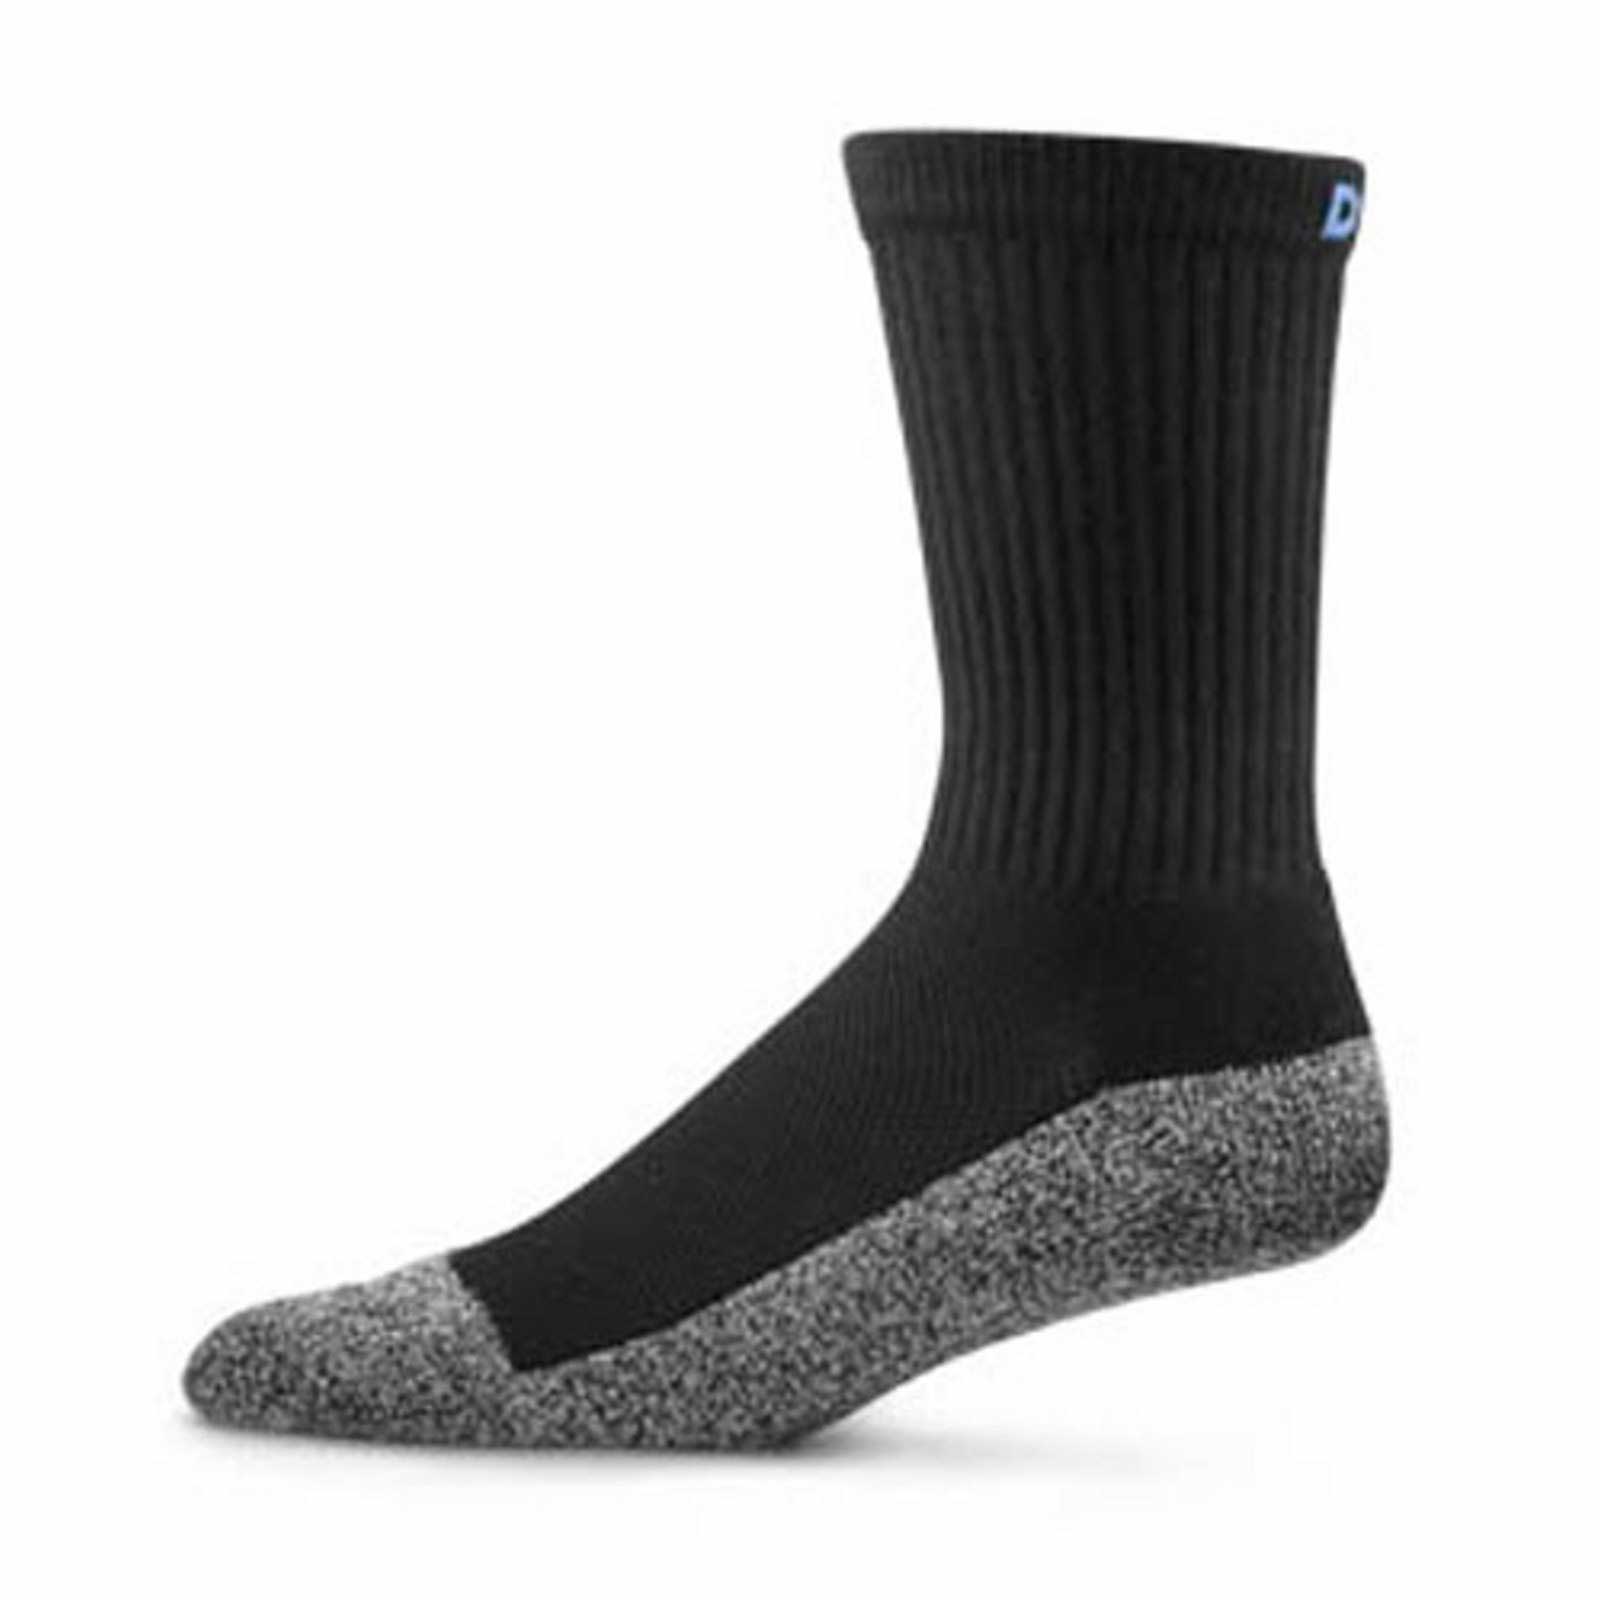 Dr. Comfort - Extra-Roomy Socks for People with Edema - Therapeutic ...